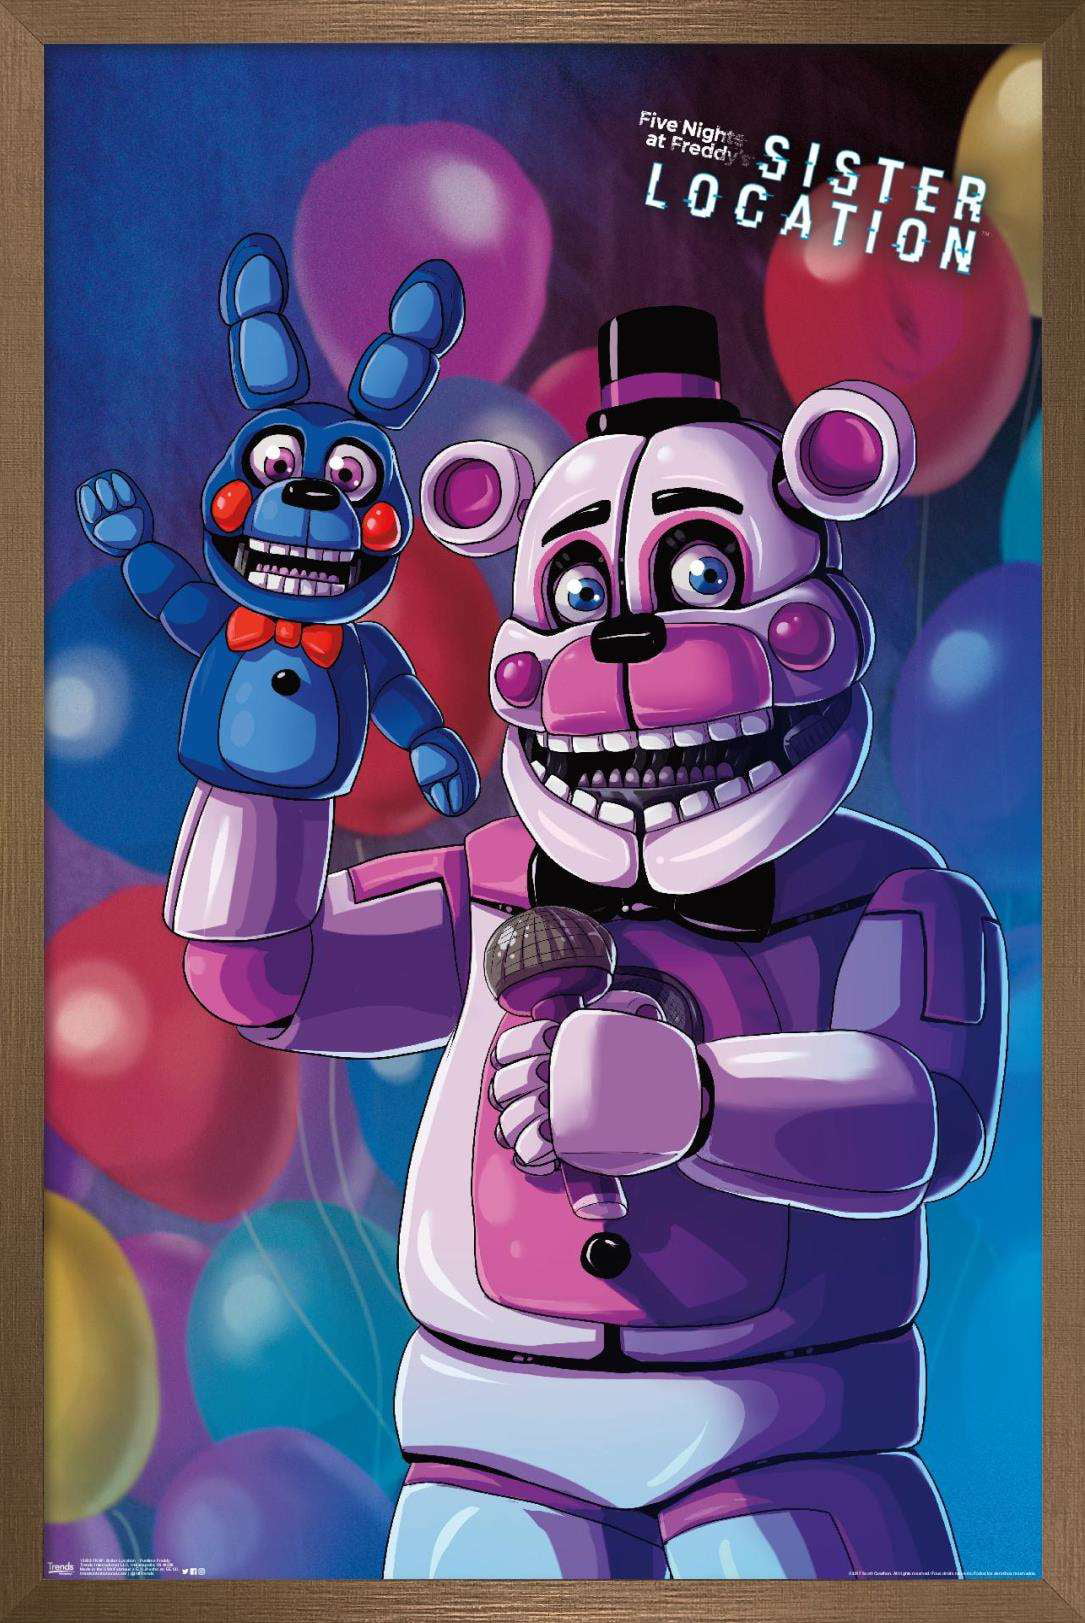 Five Nights At Freddys Wall Art for Sale